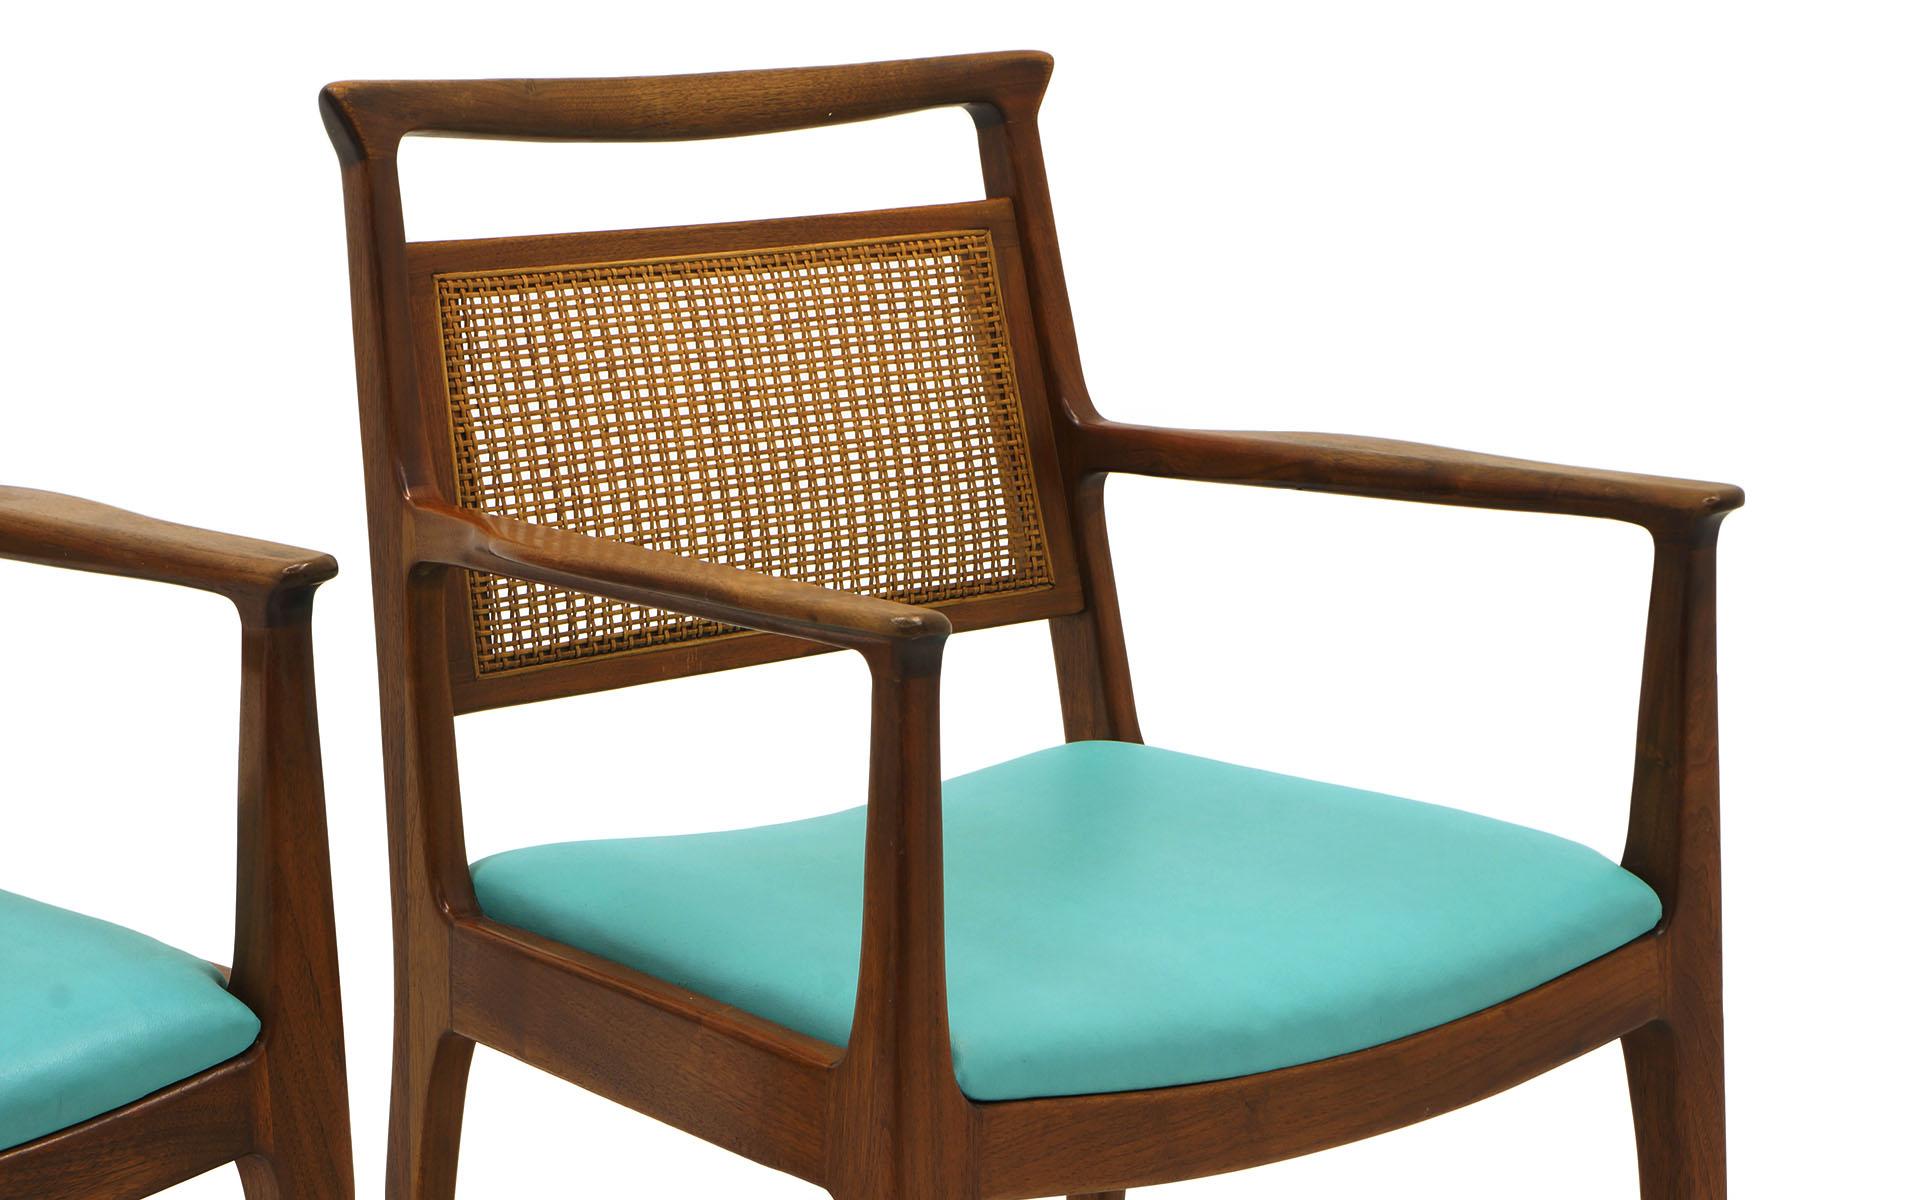 Upholstery Six Dining Chairs by Edward Wormley, Walnut Frames, Cane Backs and Blue Seats